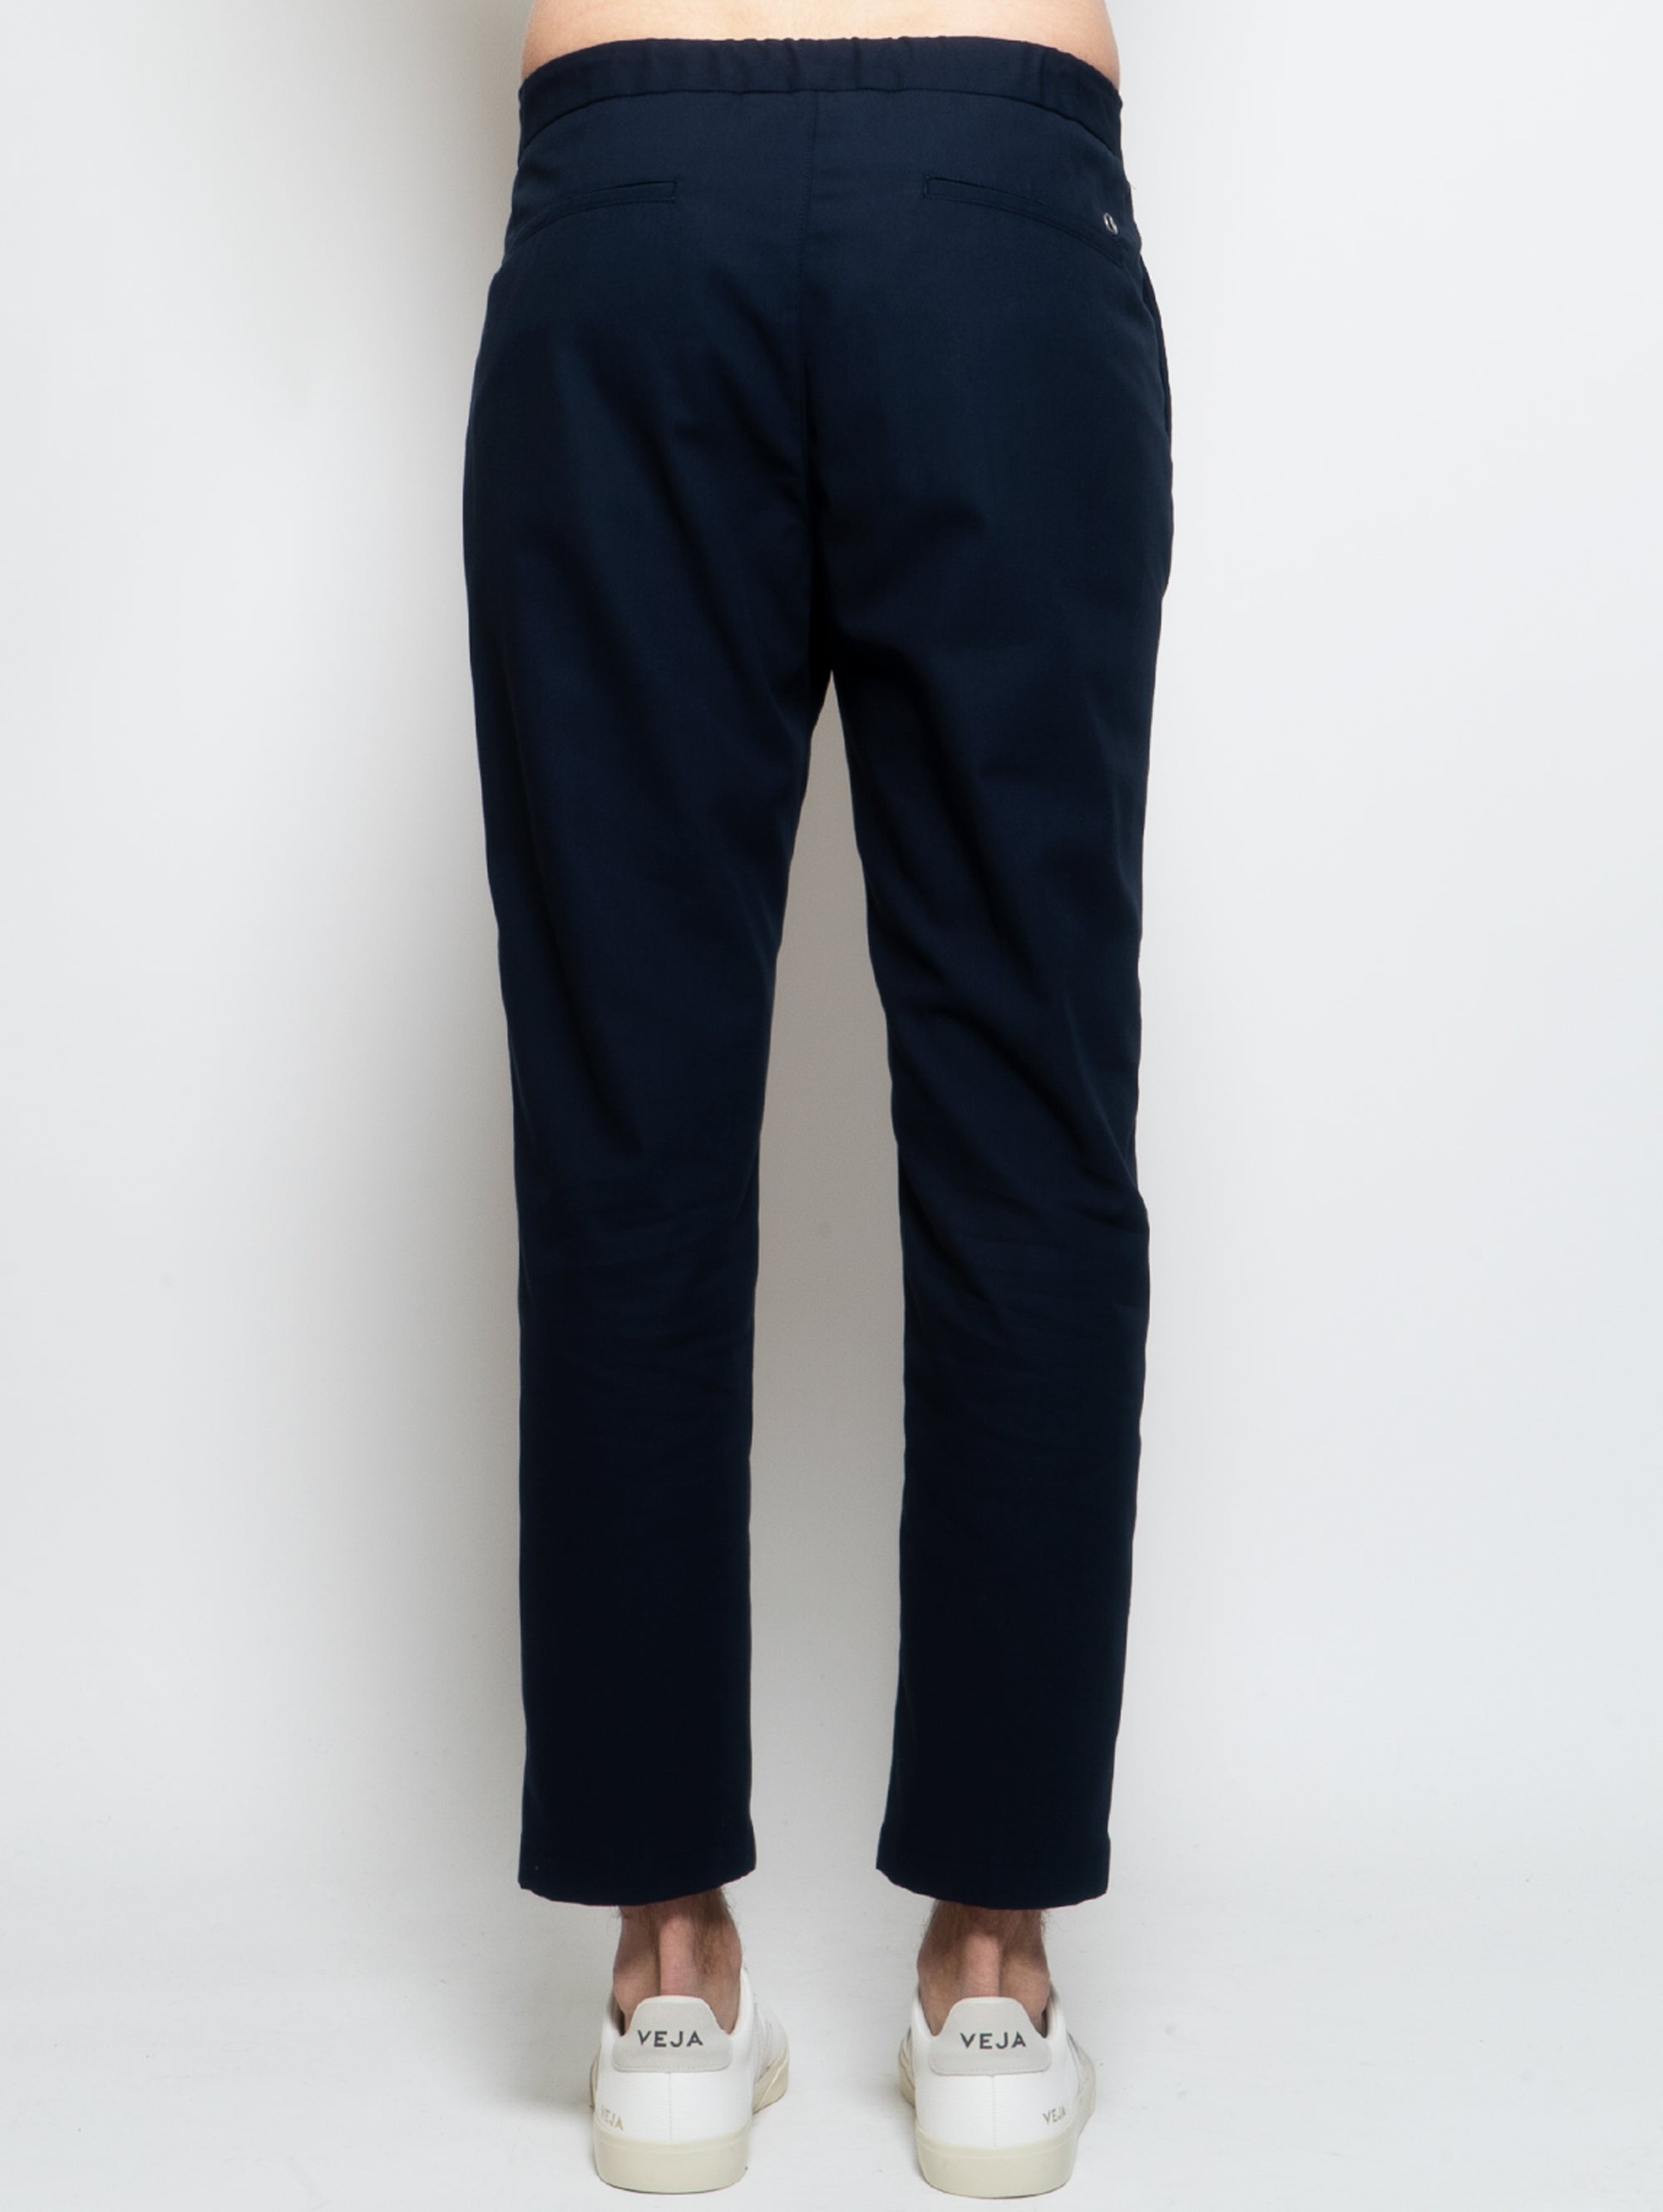 Blue Pants with Pleats and Elastic Waist